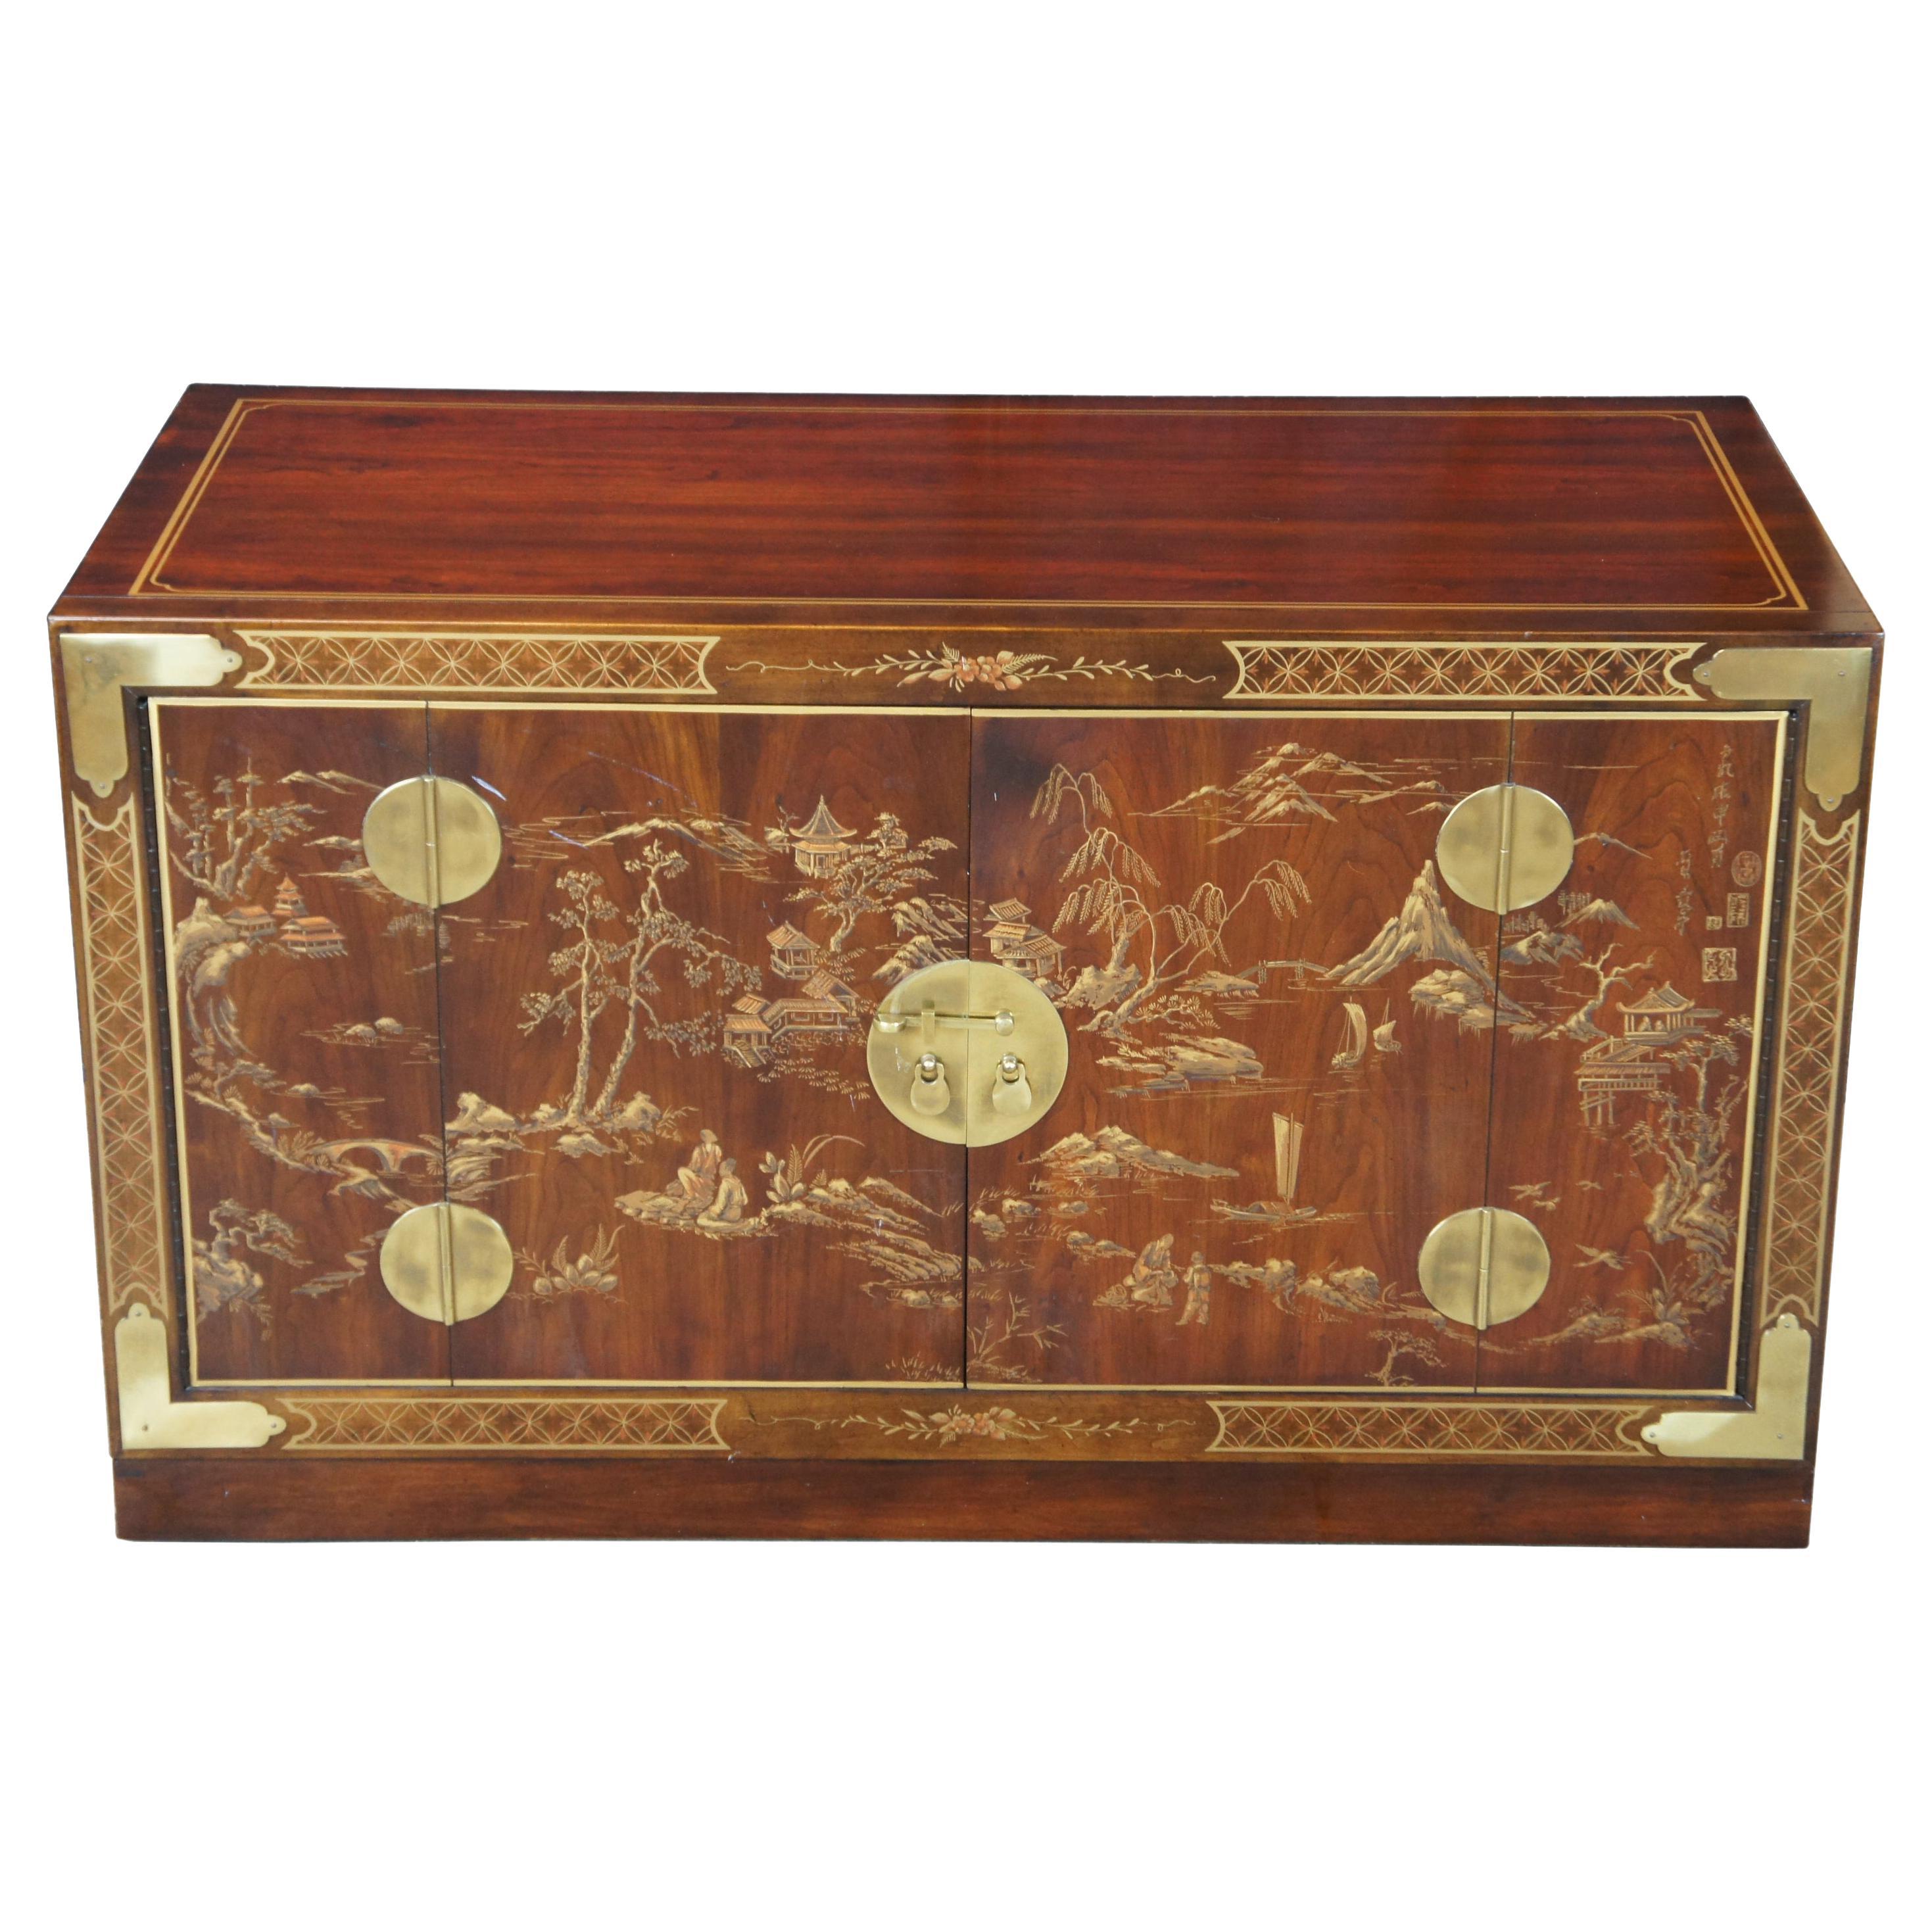 Drexel Heritage Et Cetera Rosewood Chinoiserie Campaign Ming Console Cabinet 77'